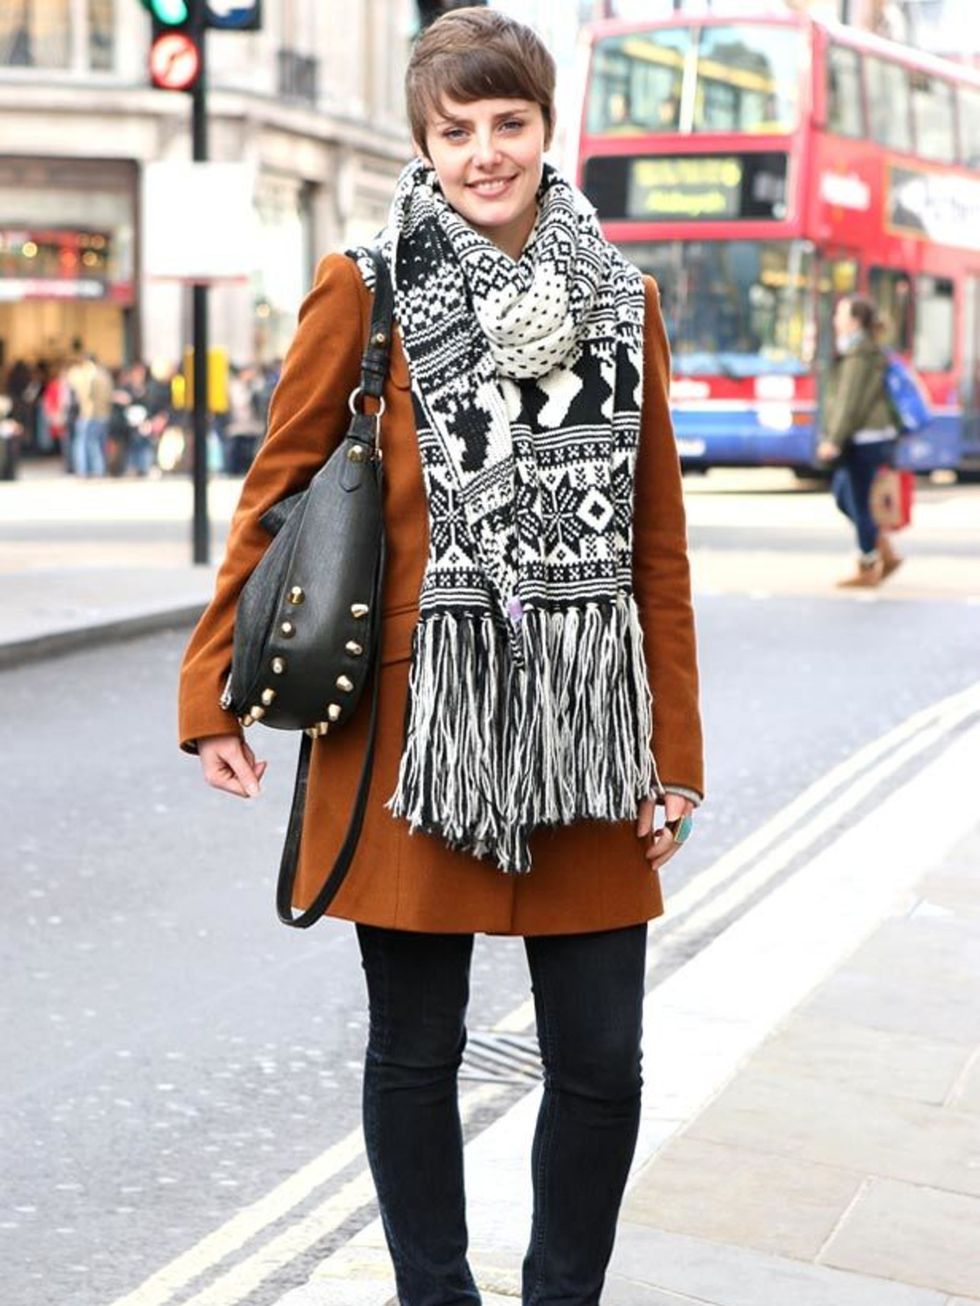 <p>Photo by Anthea Simms.Kira, 24, Product Development. Topshop coat and jeans, River Island scarf and Asos bag.</p>